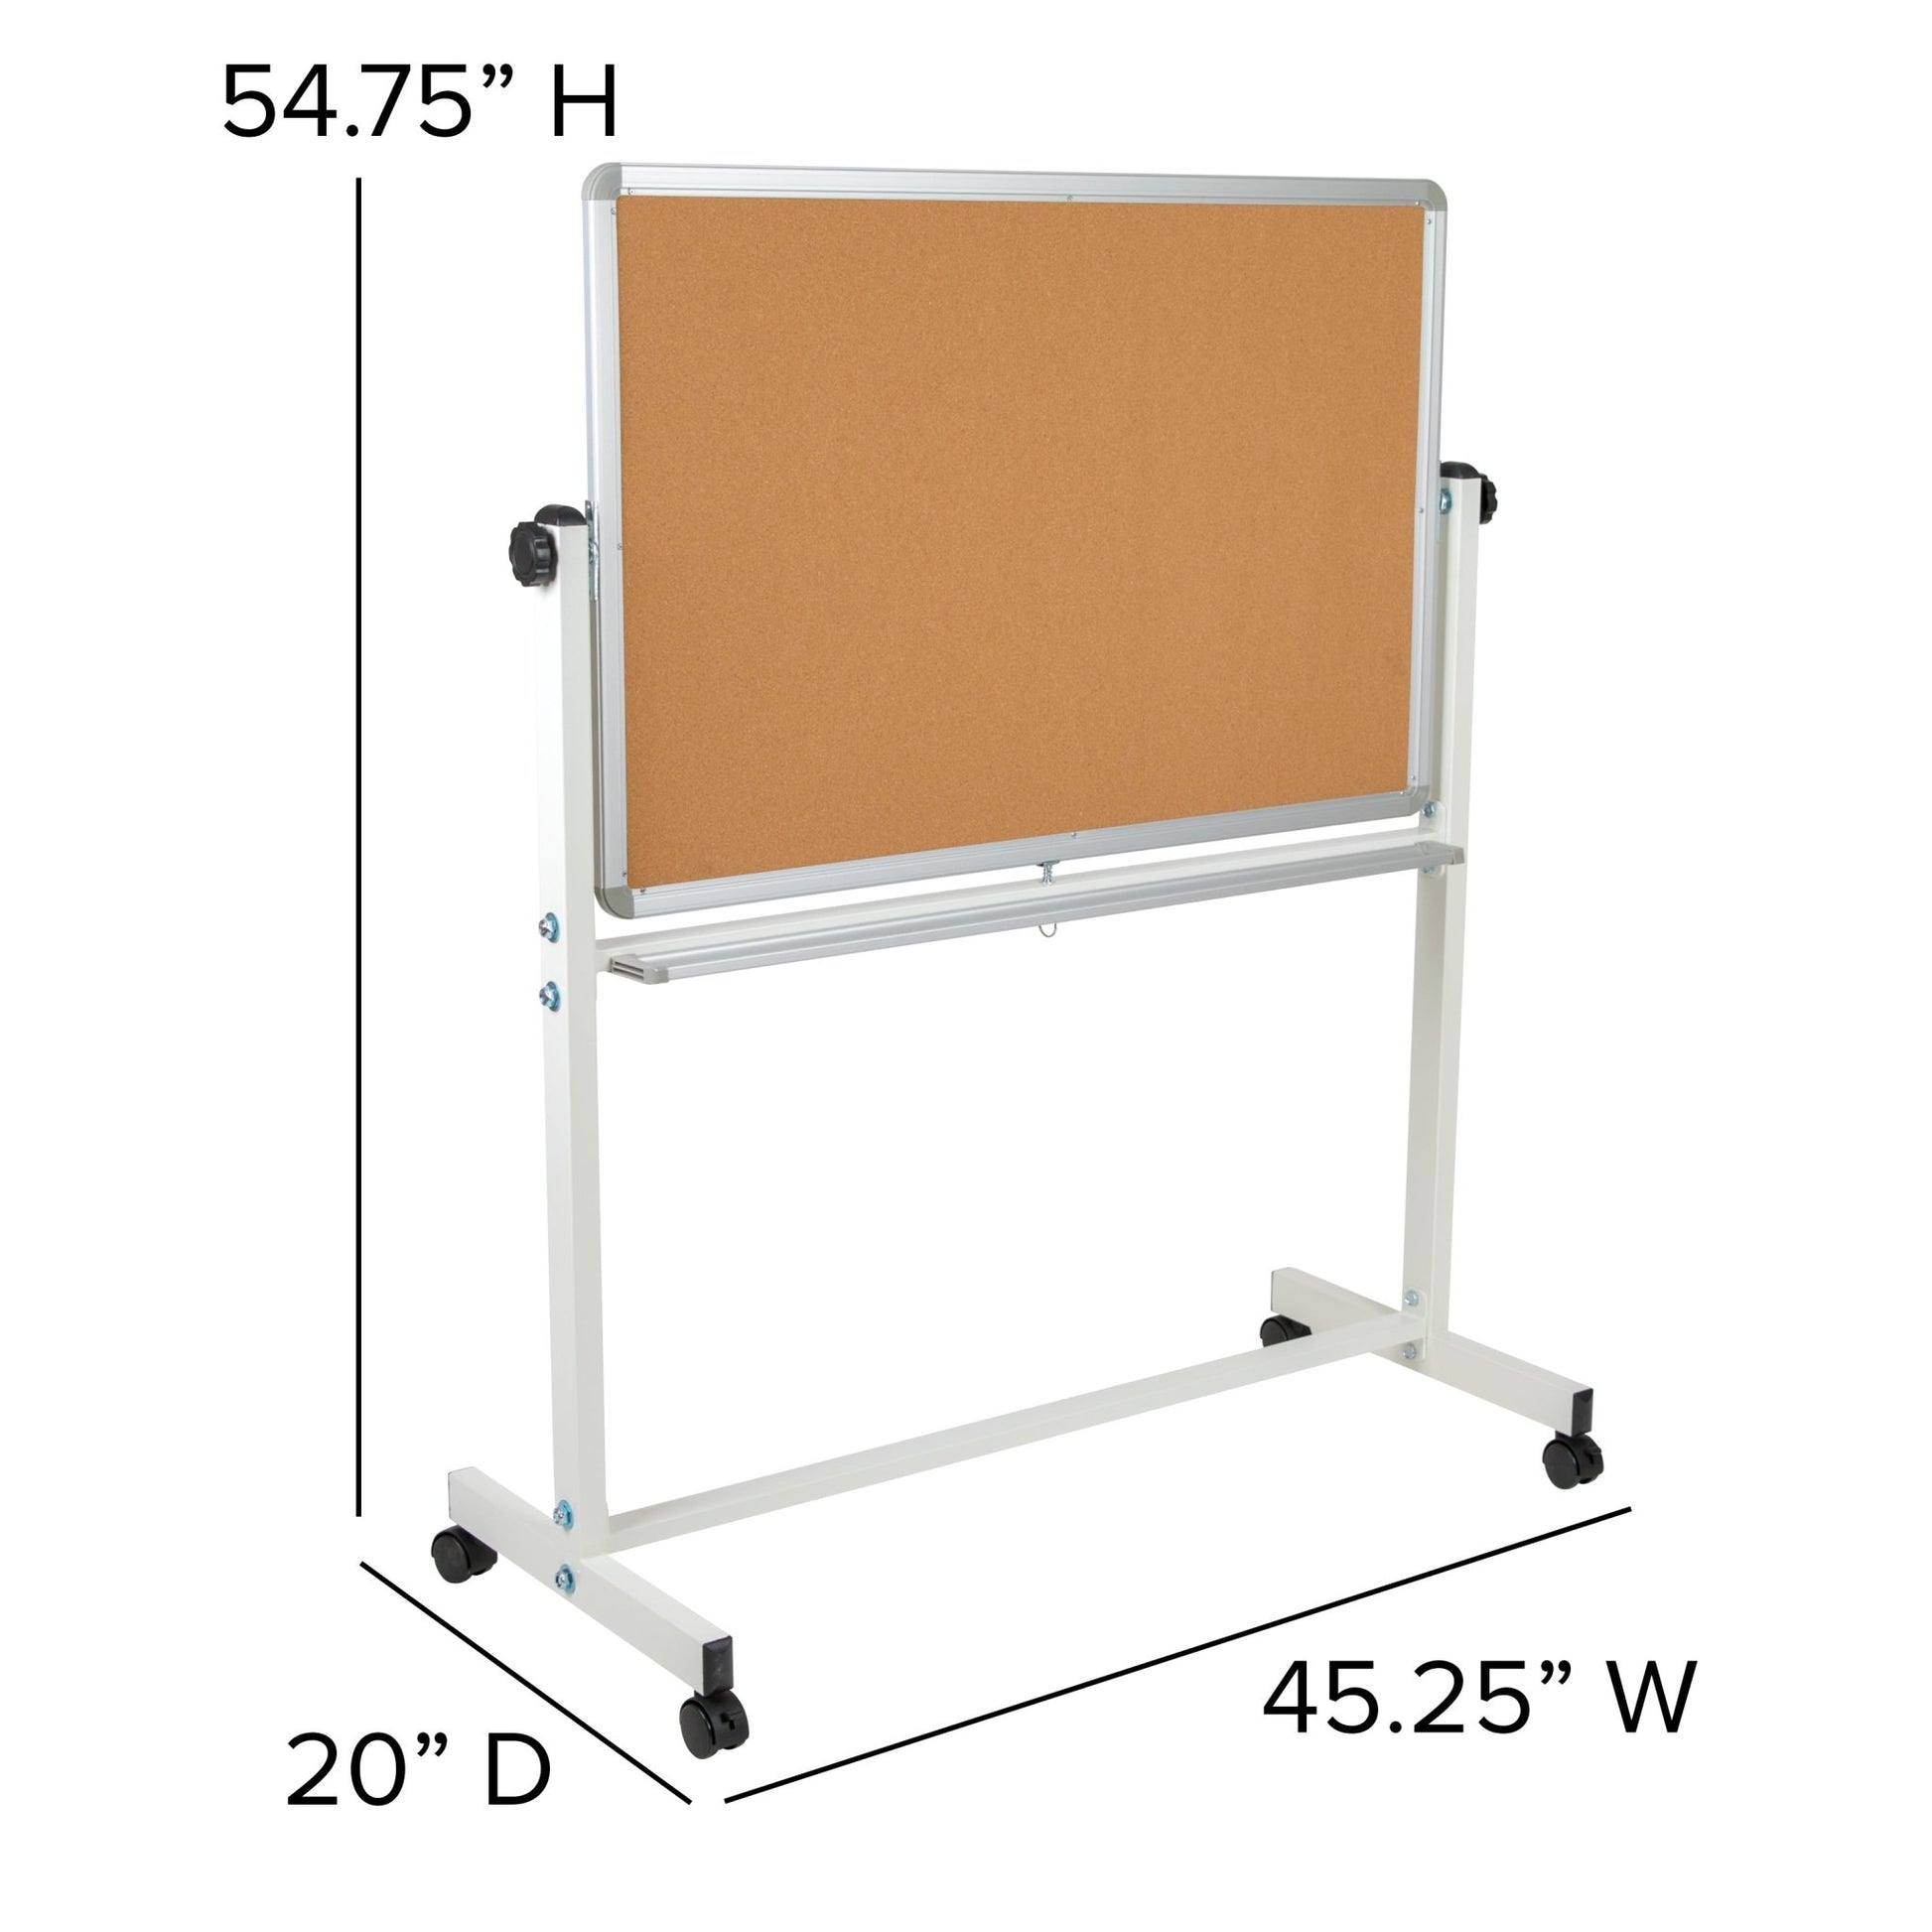 HERCULES Series 45.25"W x 54.75"H Reversible Mobile Cork Bulletin Board and White Board with Pen Tray - SchoolOutlet